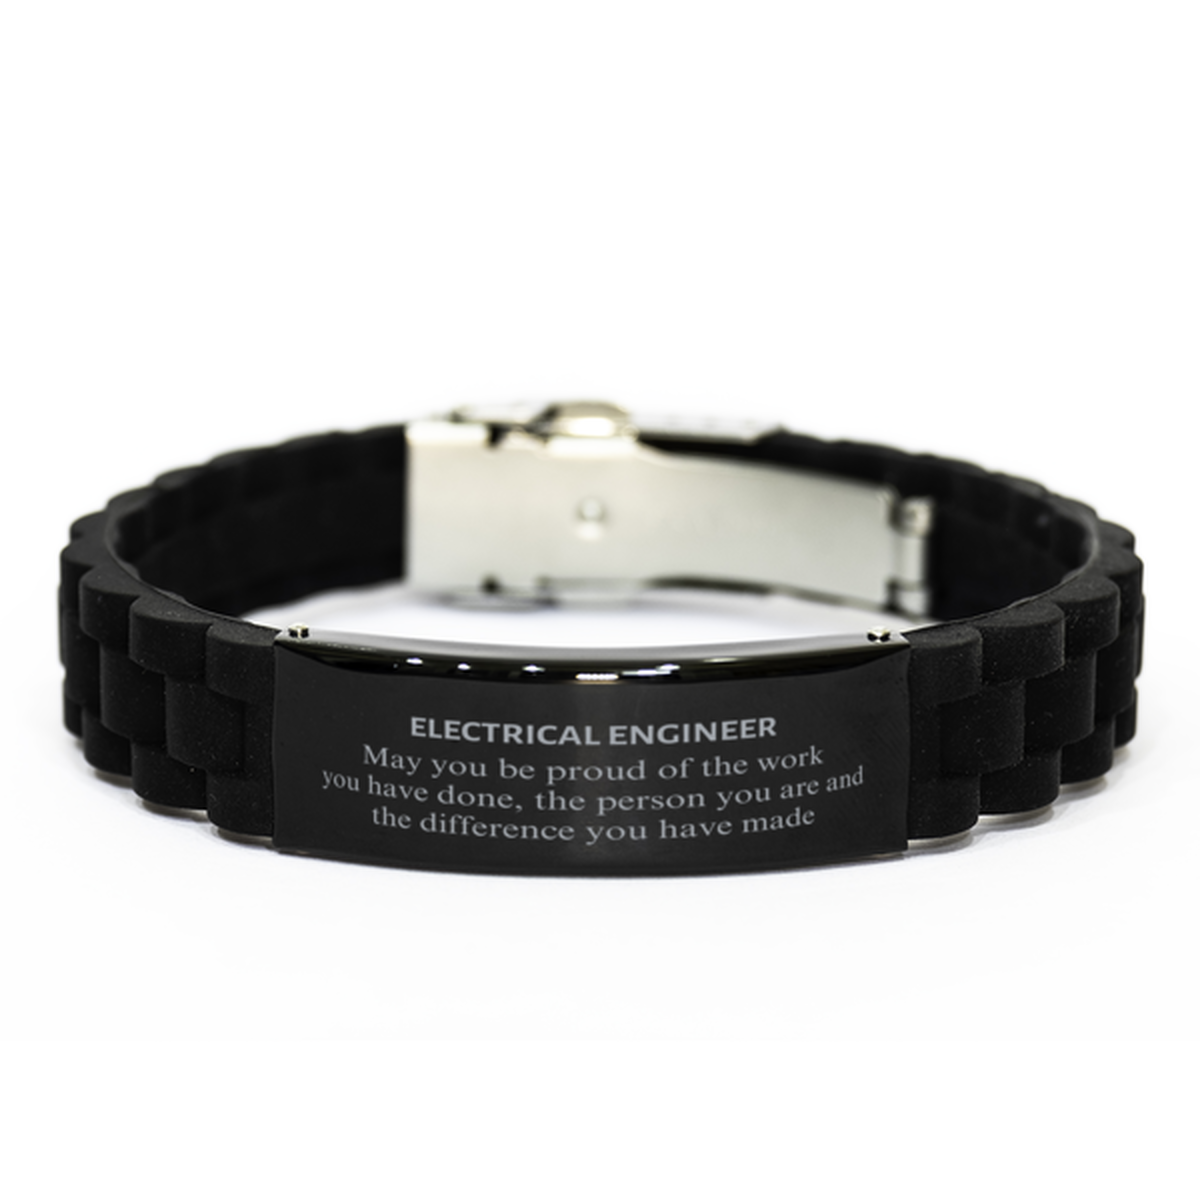 Electrical Engineer May you be proud of the work you have done, Retirement Electrical Engineer Black Glidelock Clasp Bracelet for Colleague Appreciation Gifts Amazing for Electrical Engineer